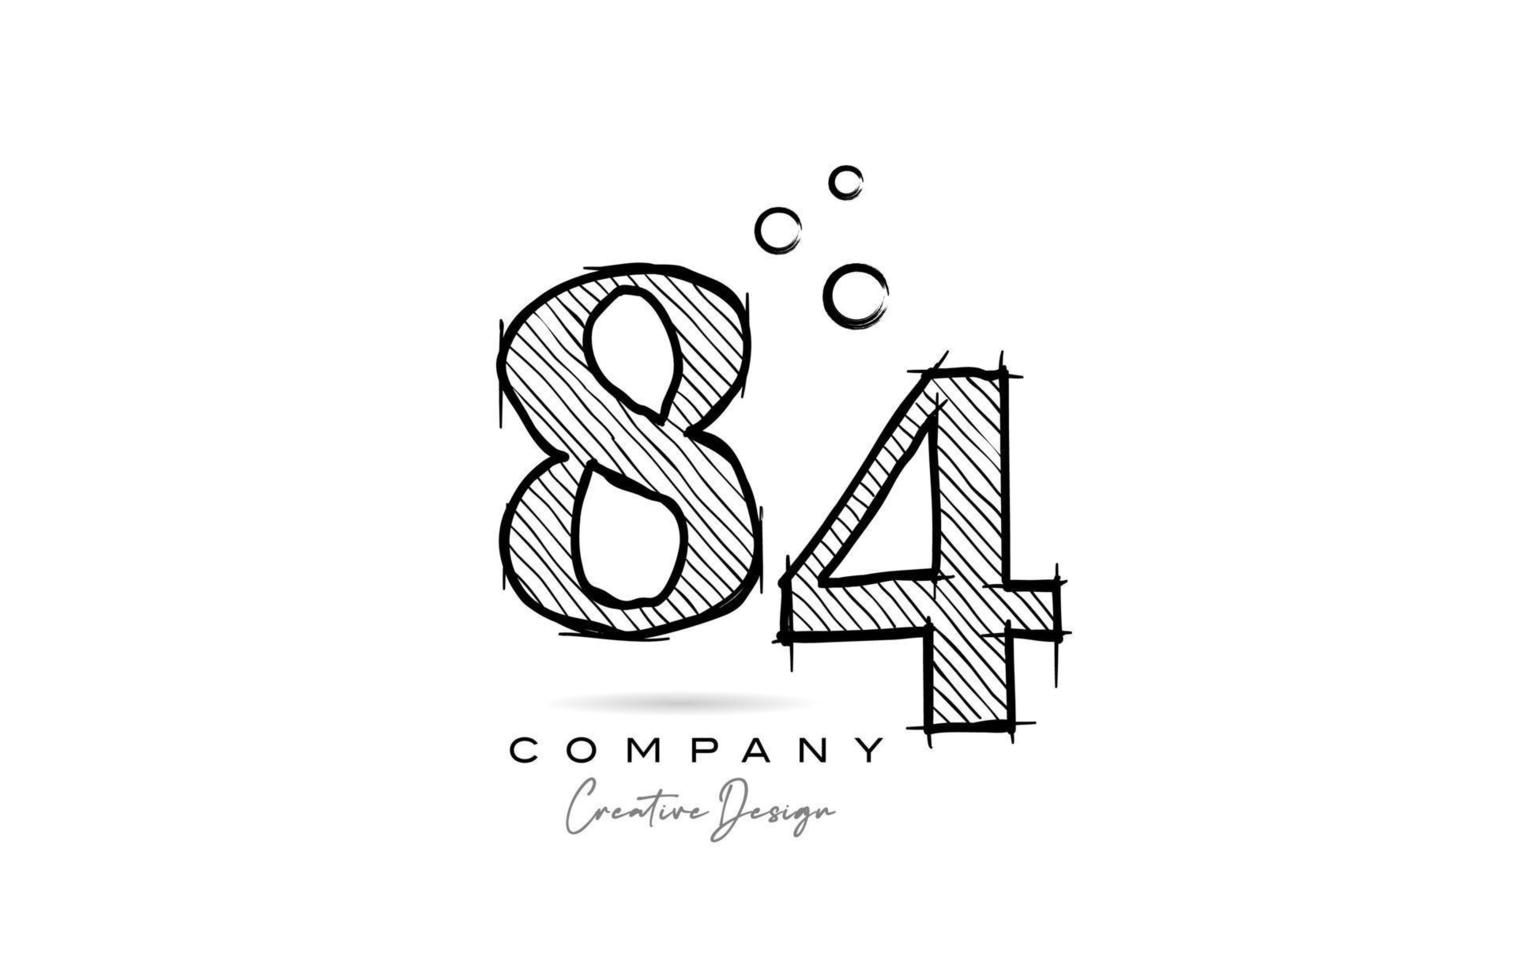 hand drawing number 84 logo icon design for company template. Creative logotype in pencil style vector